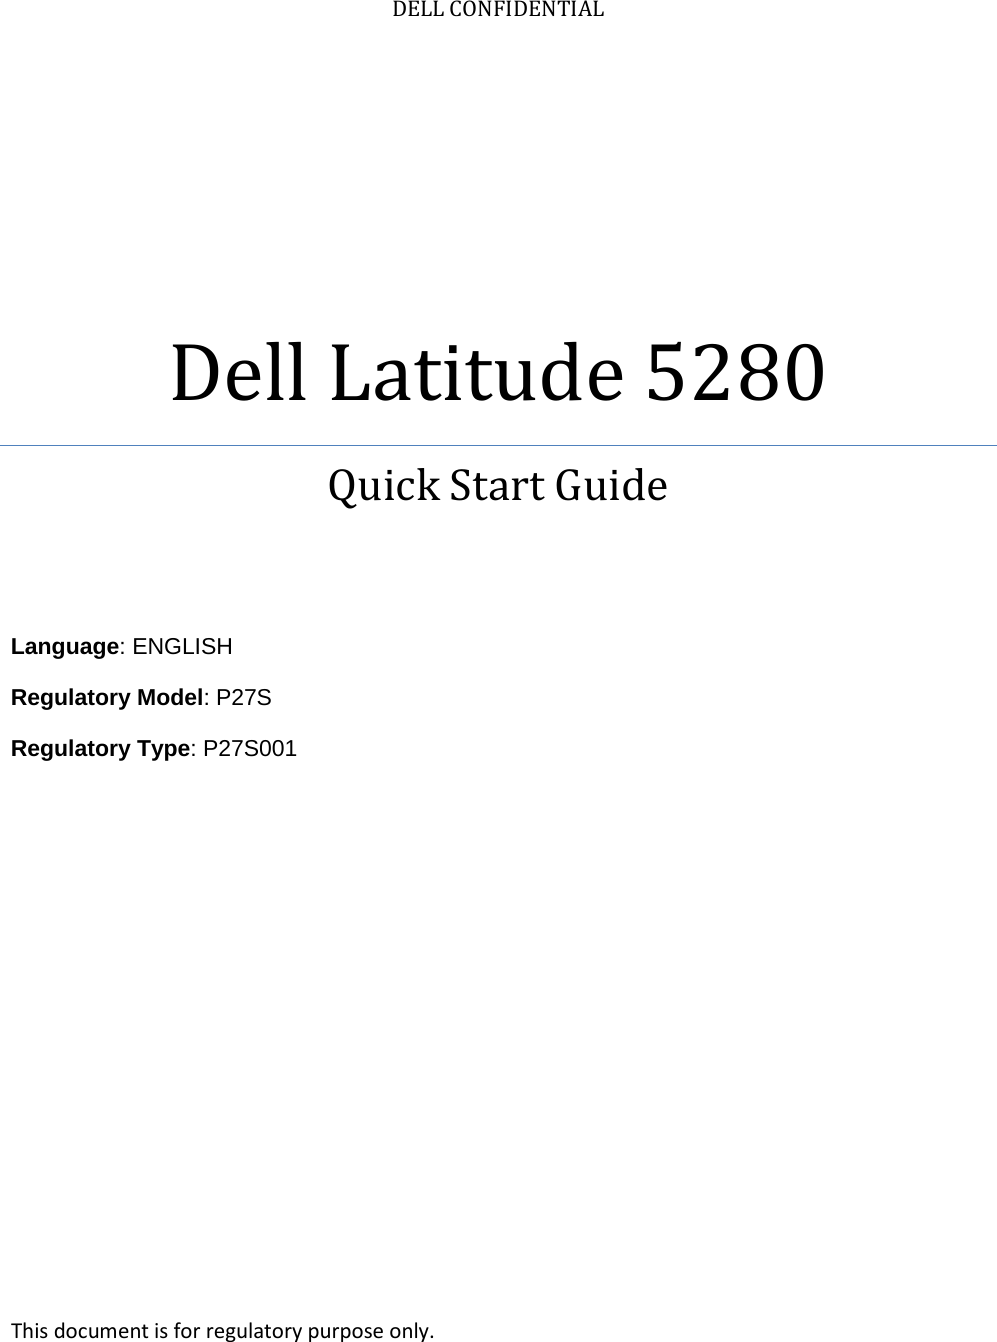 DELL CONFIDENTIAL Dell Latitude 5280 Quick Start Guide    Language: ENGLISH Regulatory Model: P27S Regulatory Type: P27S001      This document is for regulatory purpose only. 